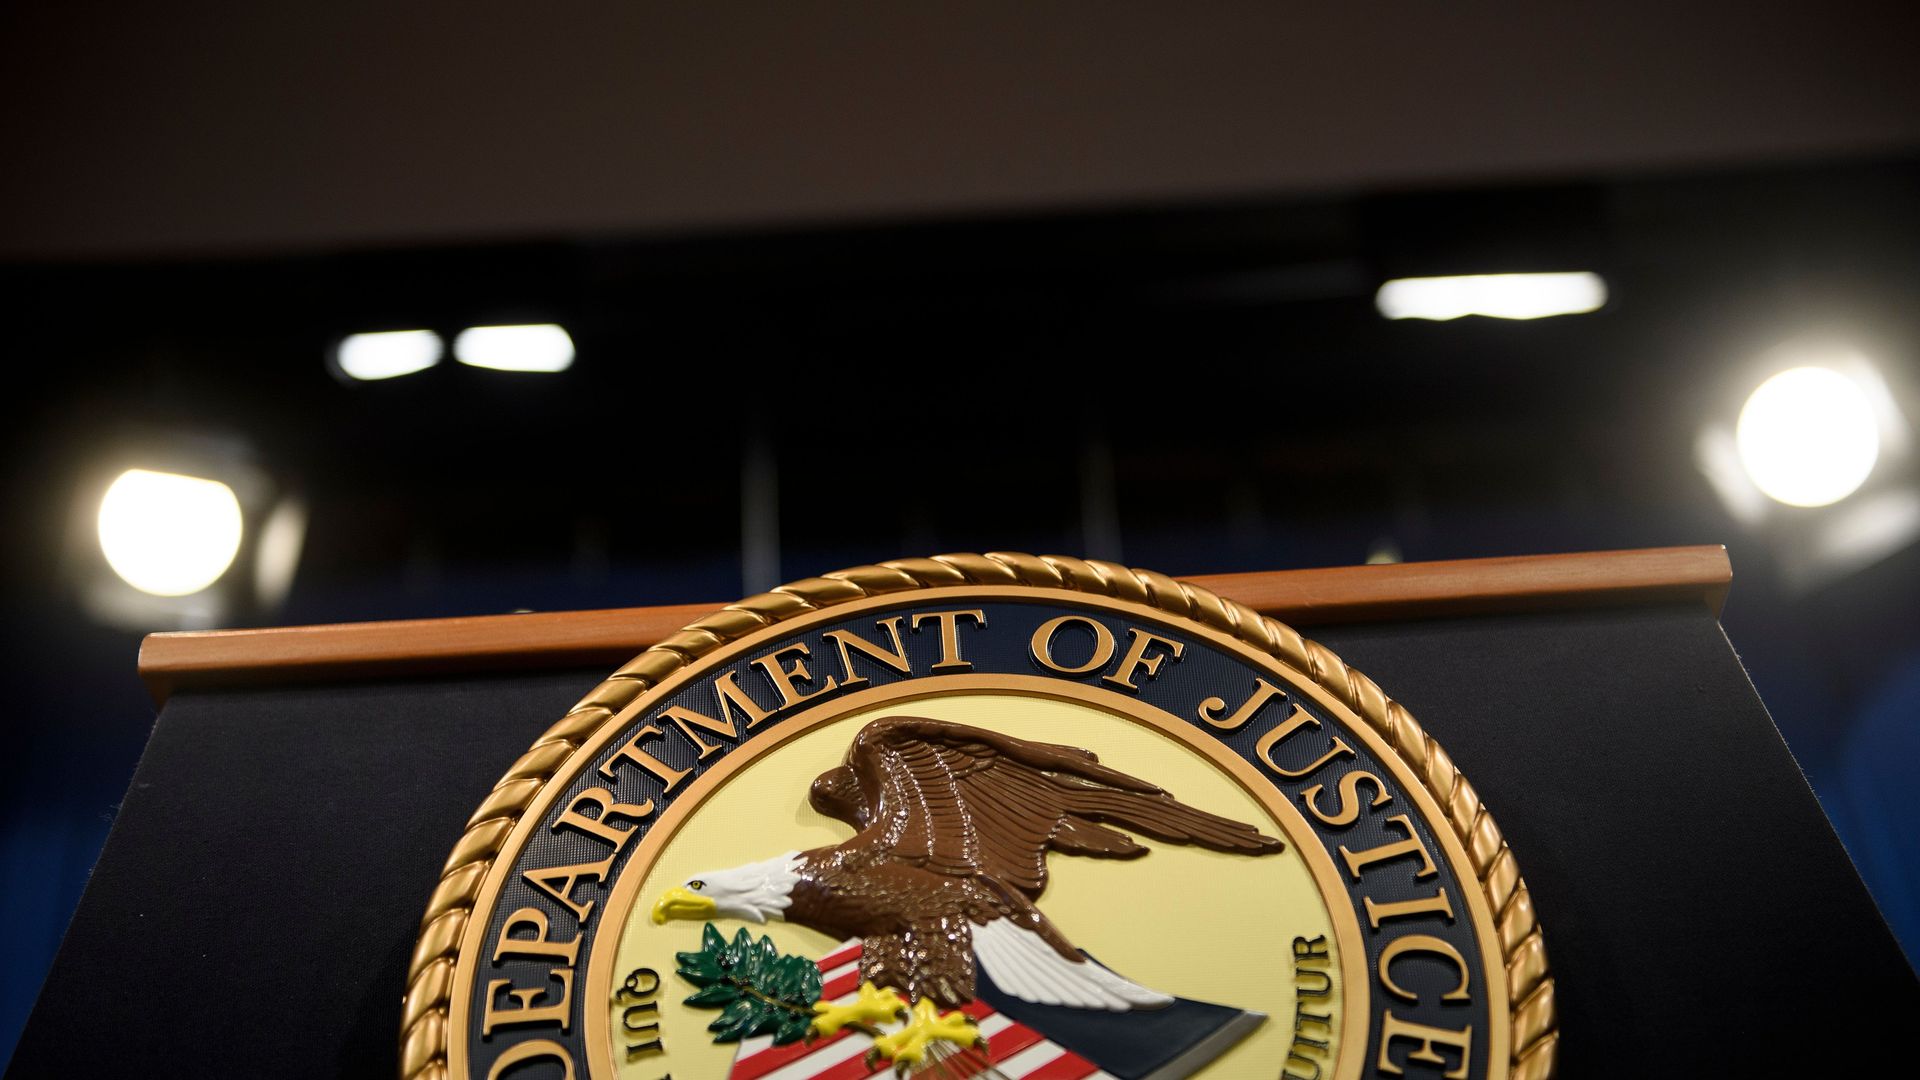 The Department of Justice seal on the front of a podium